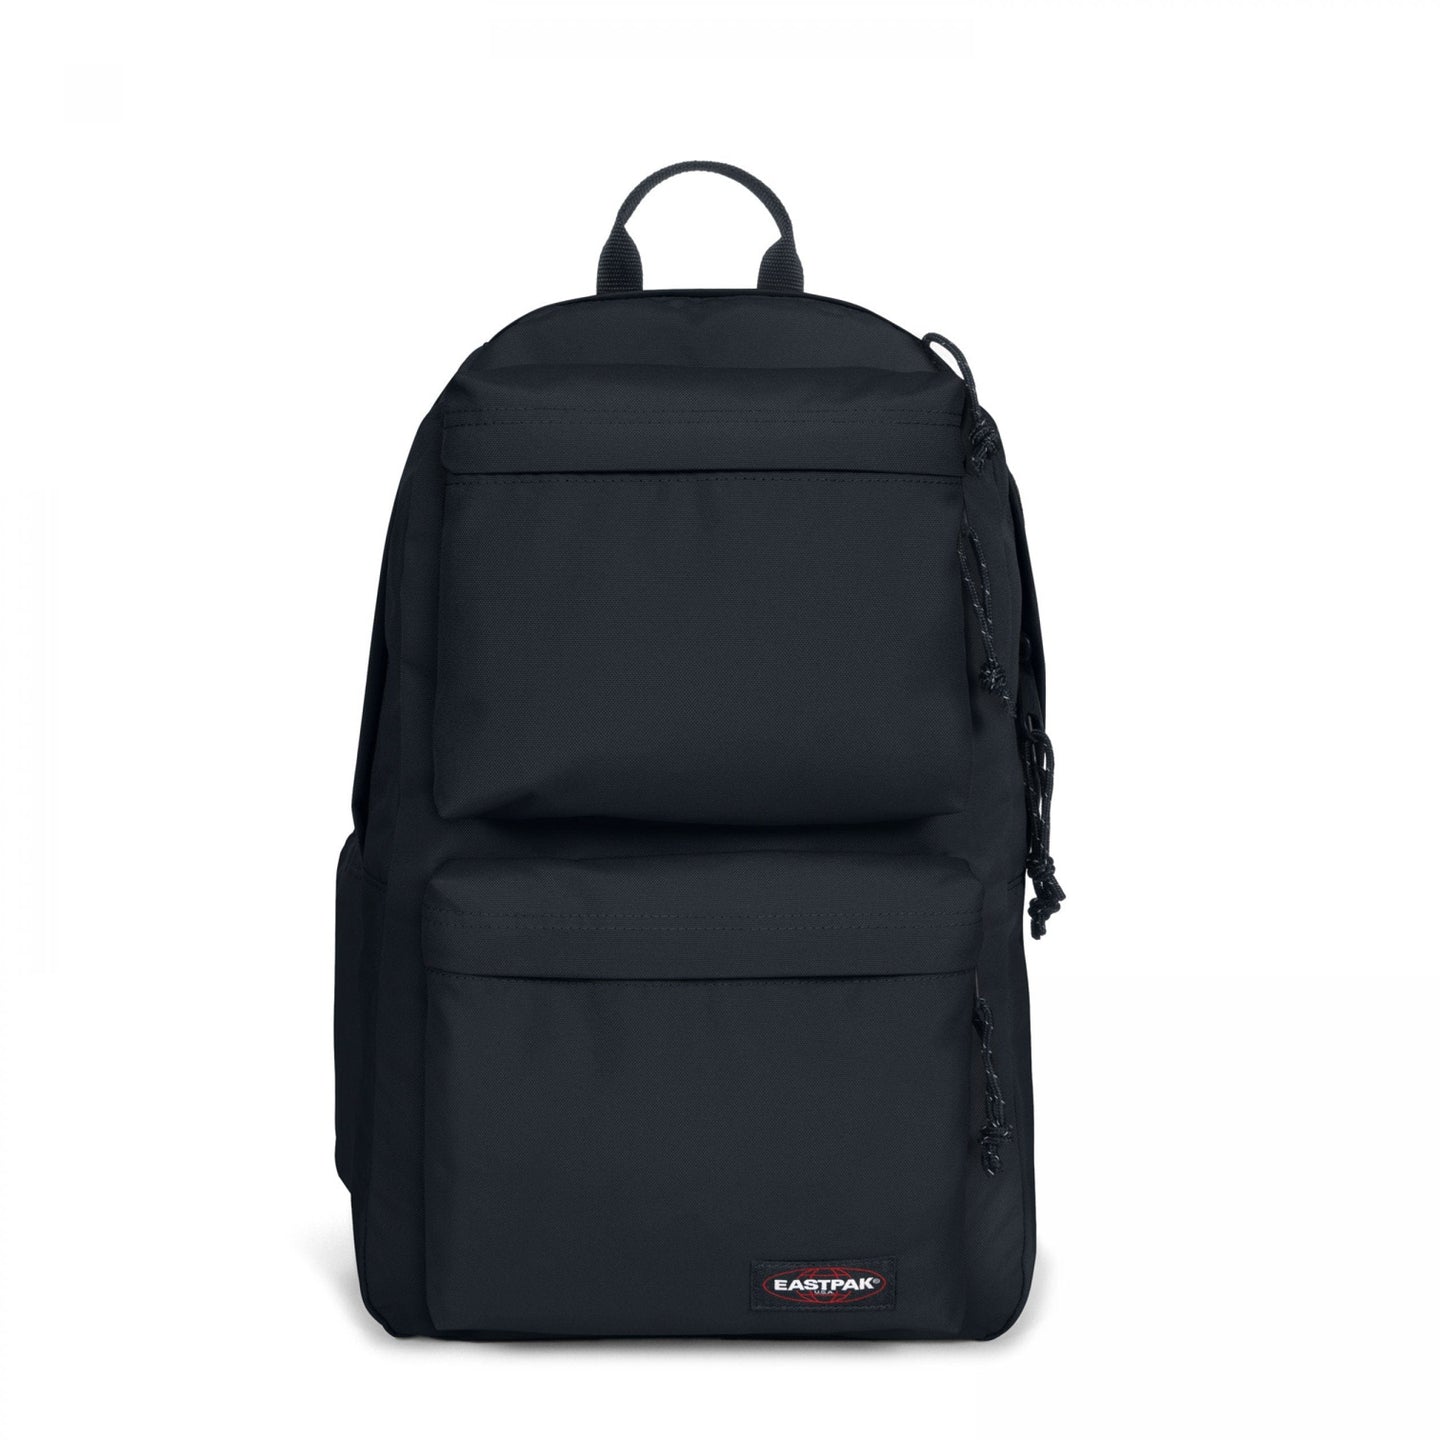 Parton Cloud Navy backpack front view